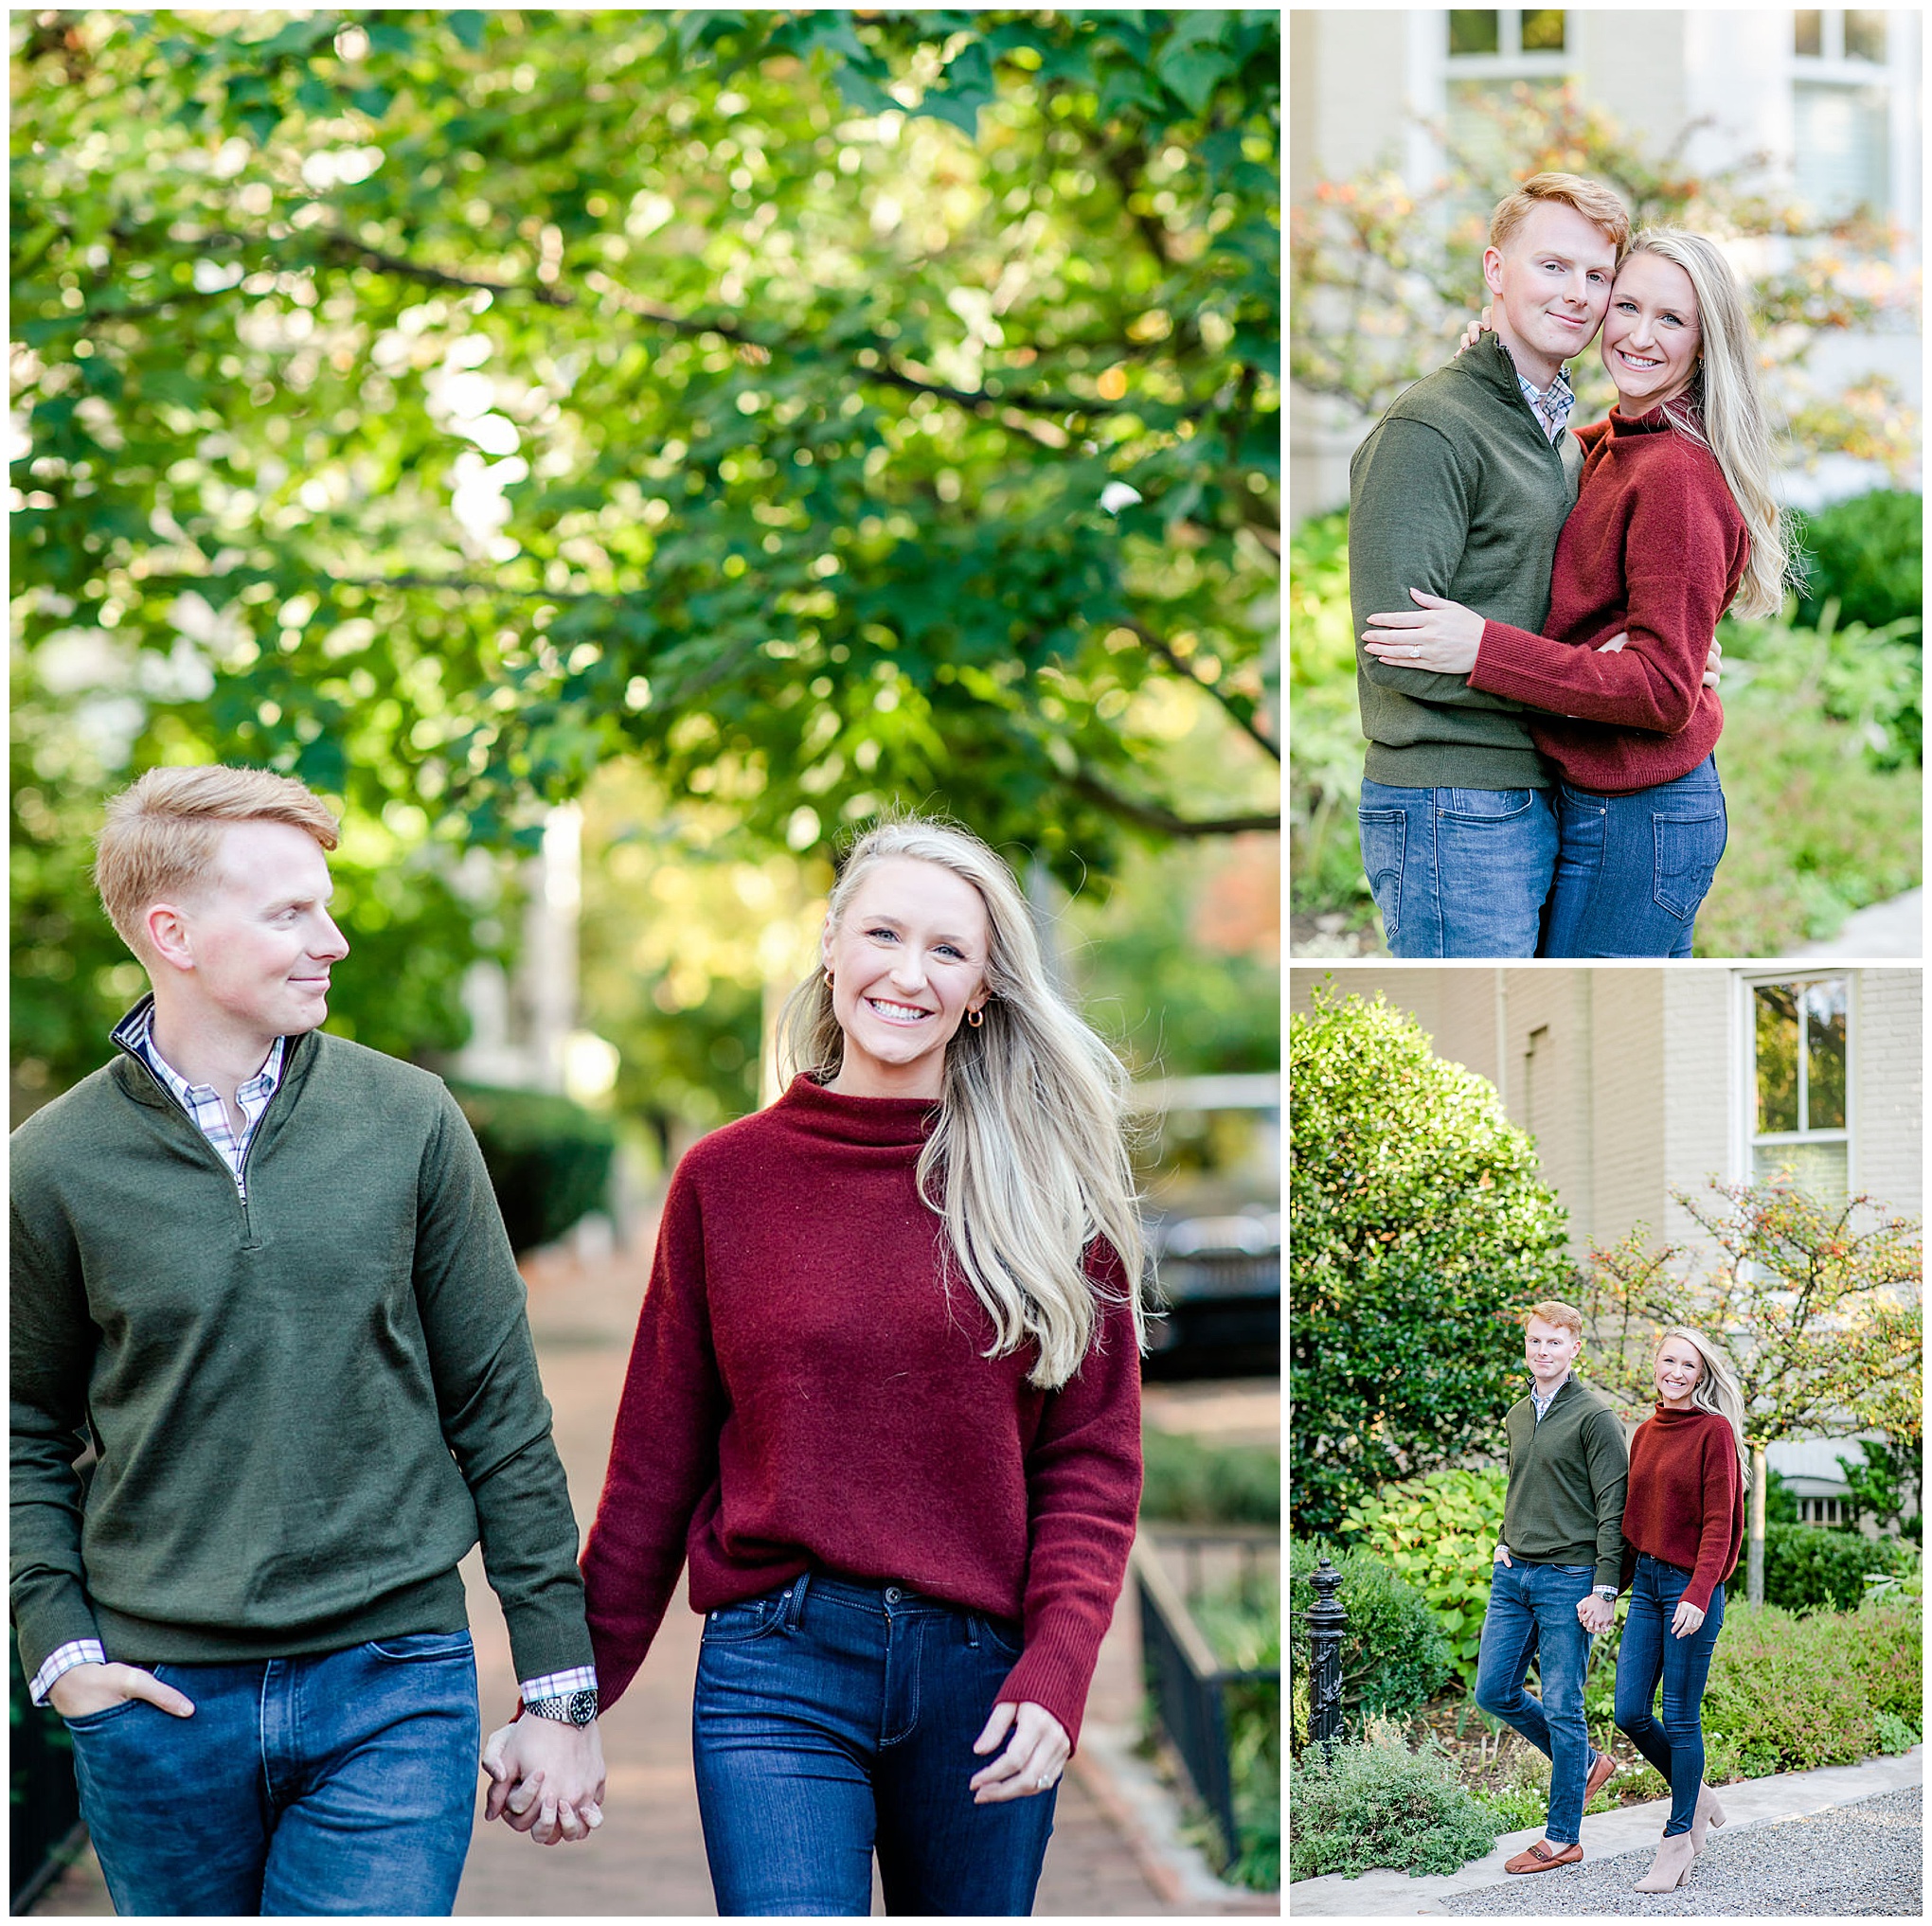 autumn magic hour engagement session, Washington D.C. engagement photos, Georgetown engagement photos, autumn engagement photos, DC portraits, DC engagement portraits, save the dates photos, Rachel E.H. Photography, couple holding hands, couple hugging, couple walking